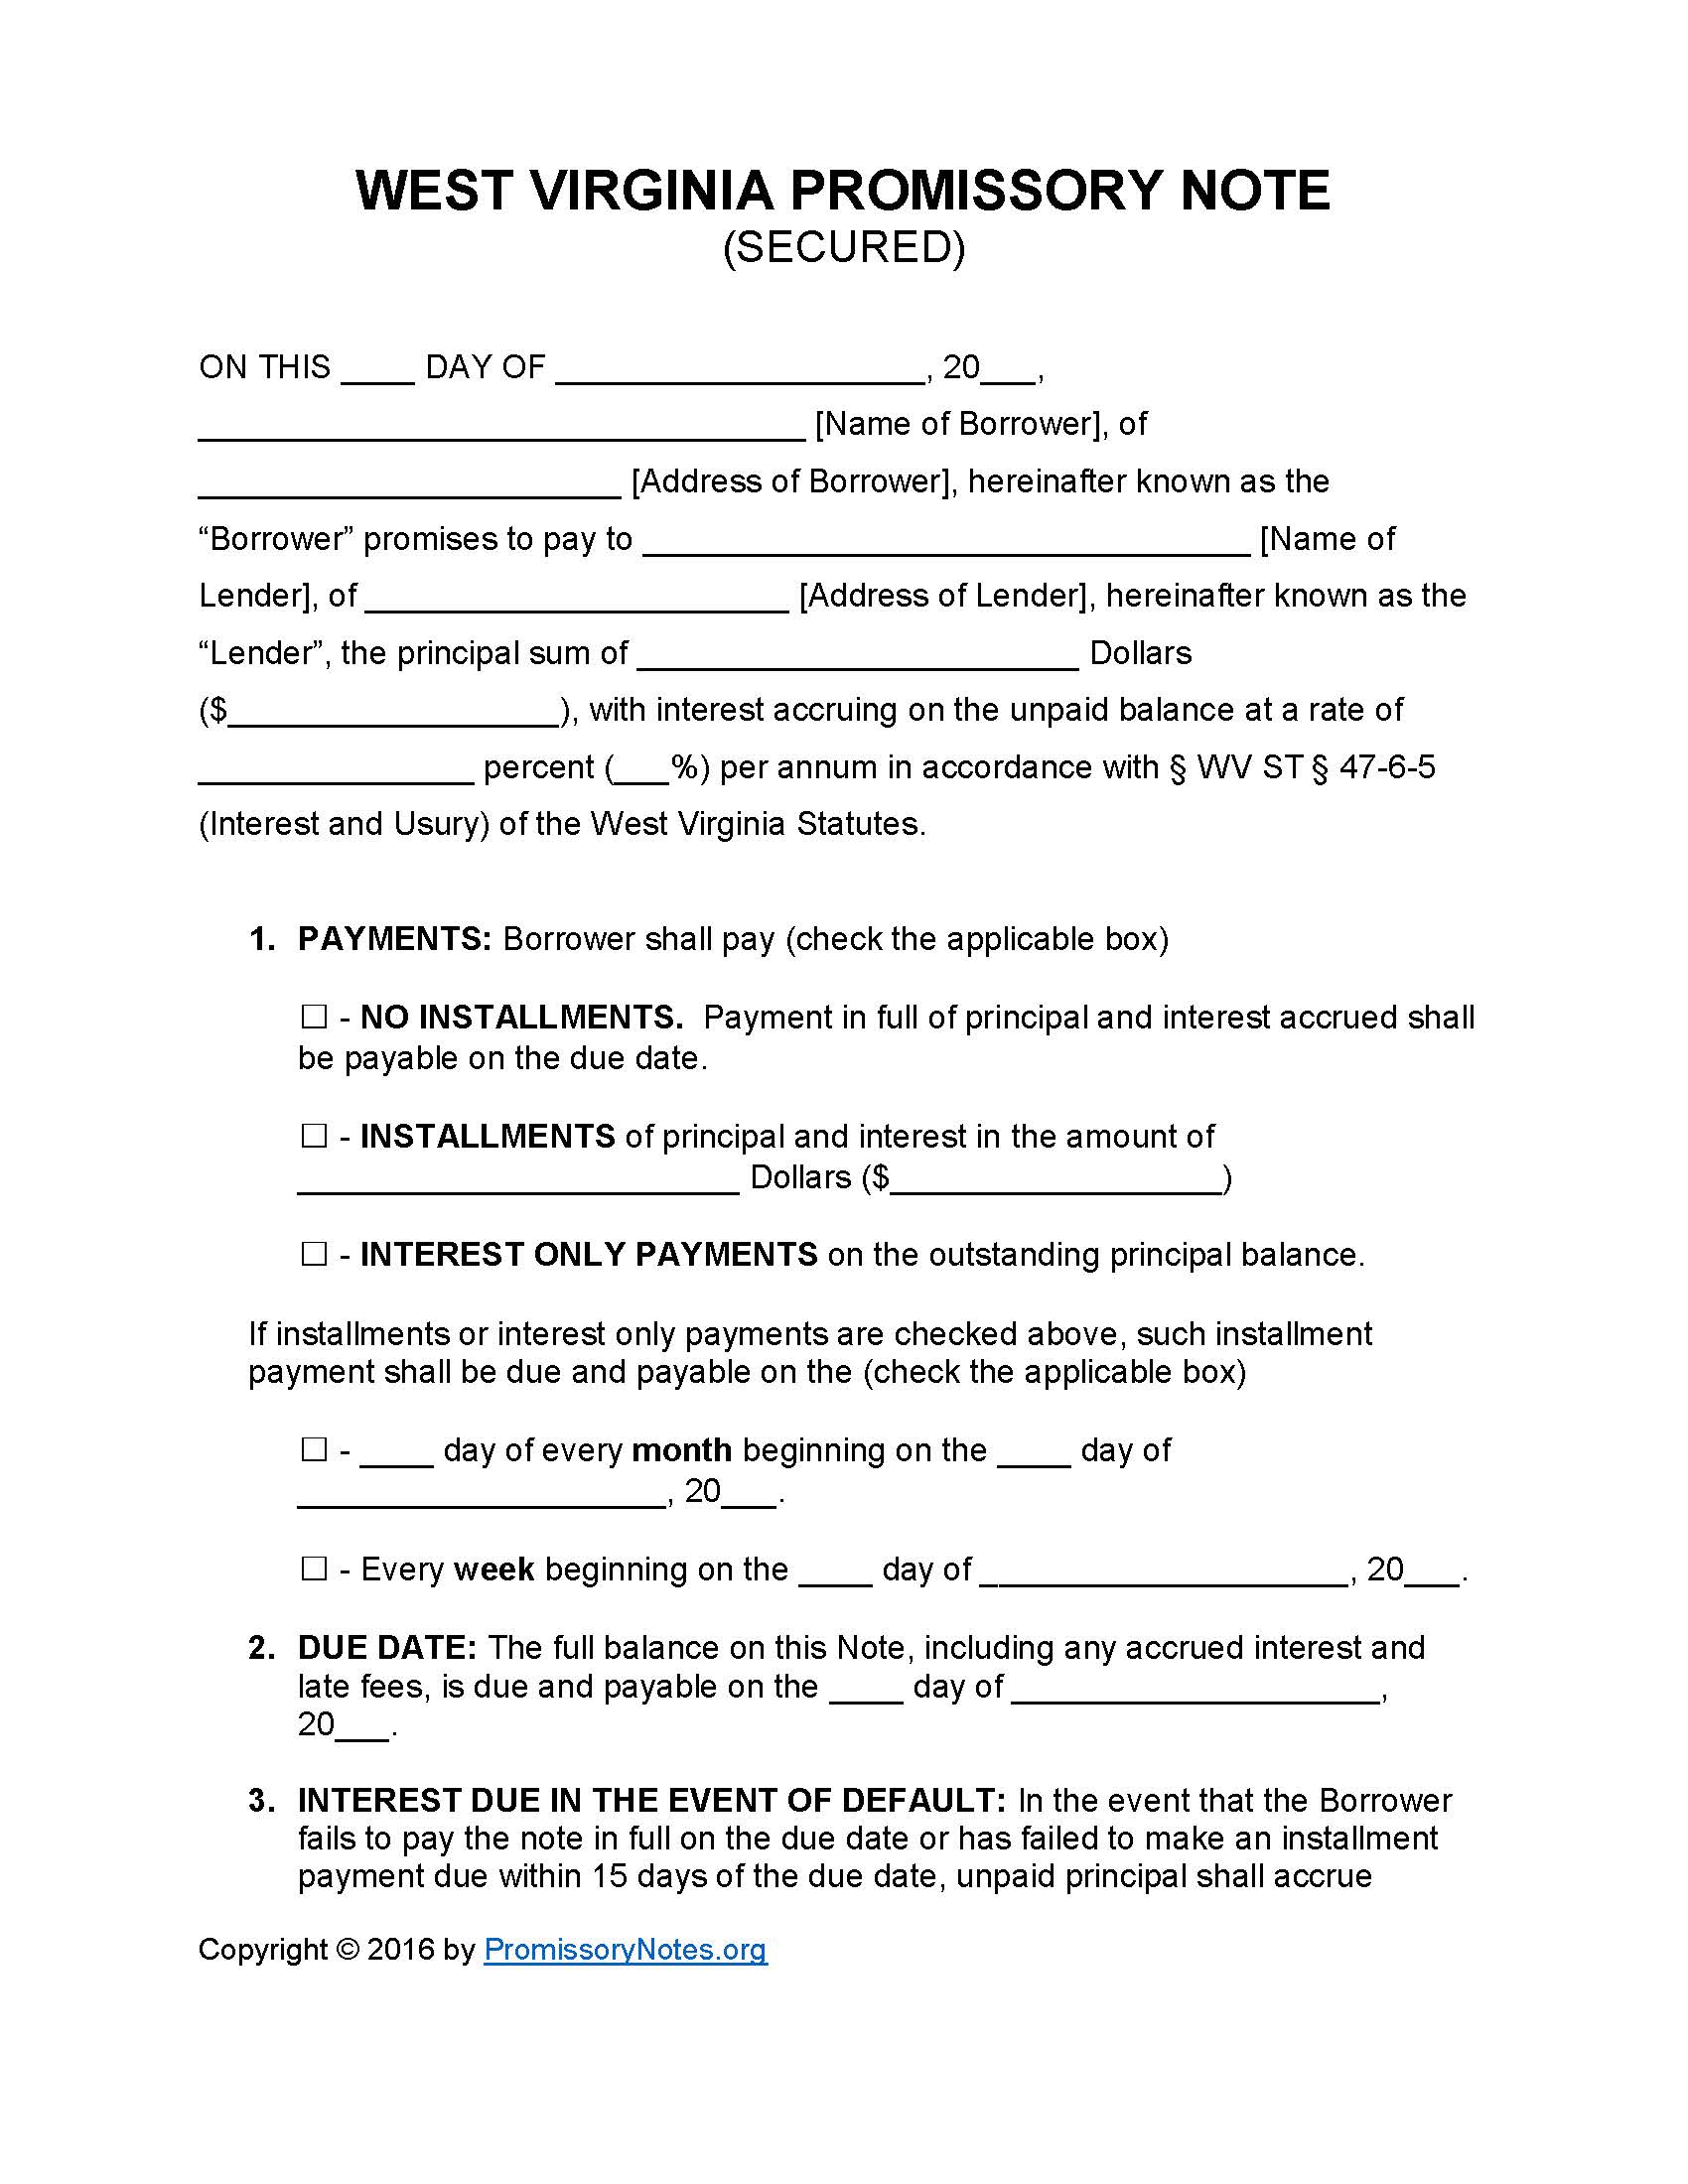 west-virginia-secured-promissory-note-form